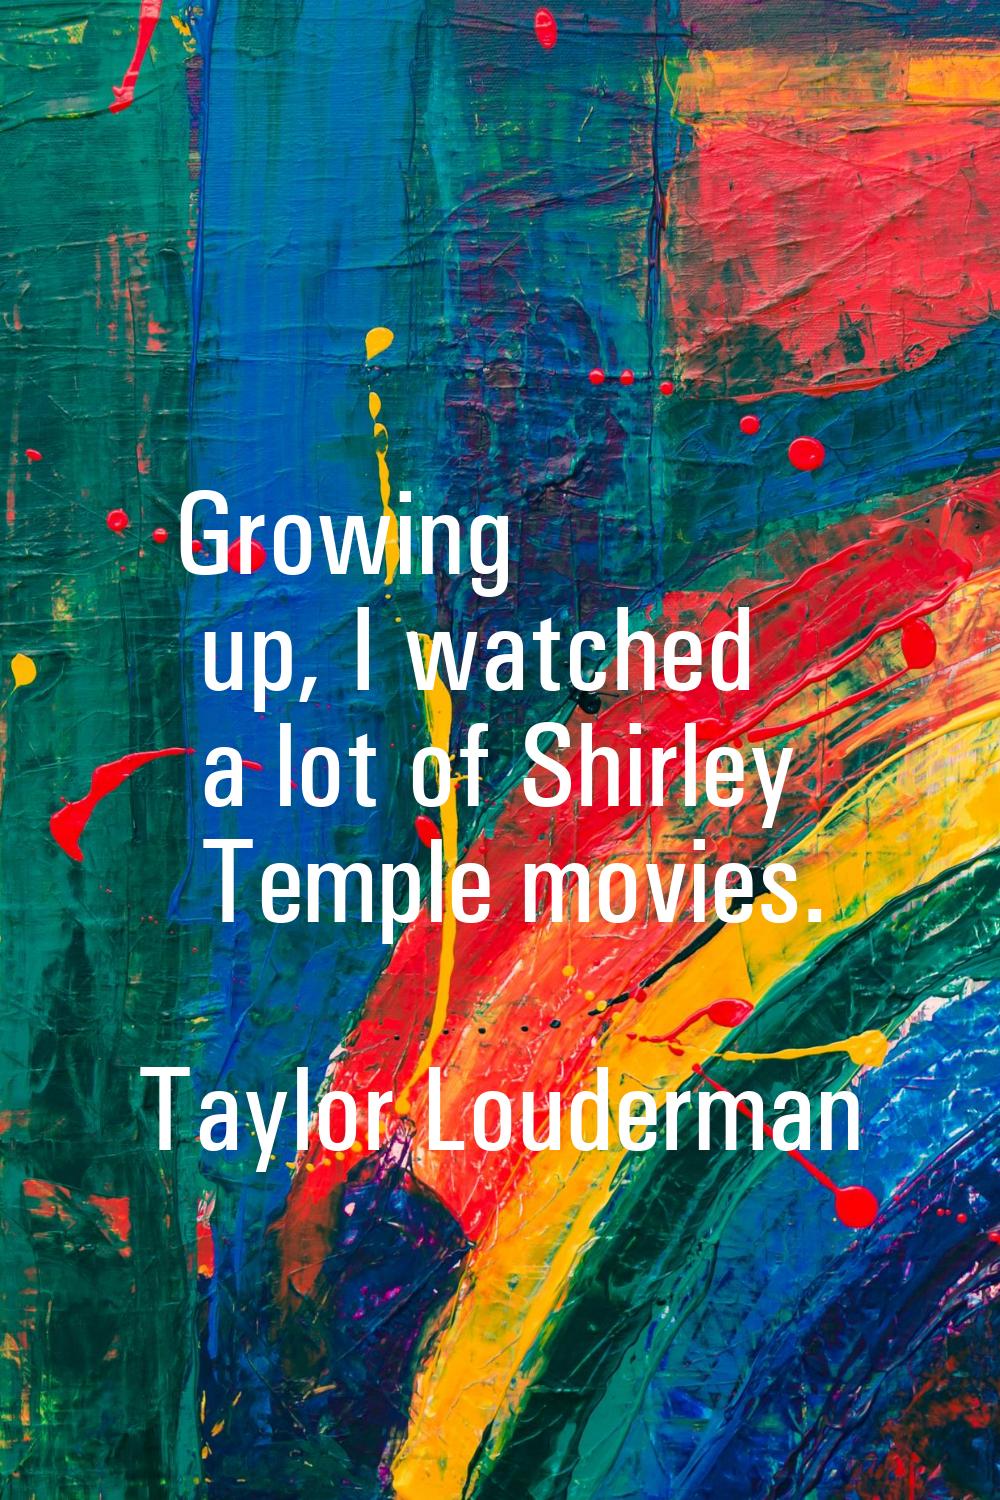 Growing up, I watched a lot of Shirley Temple movies.